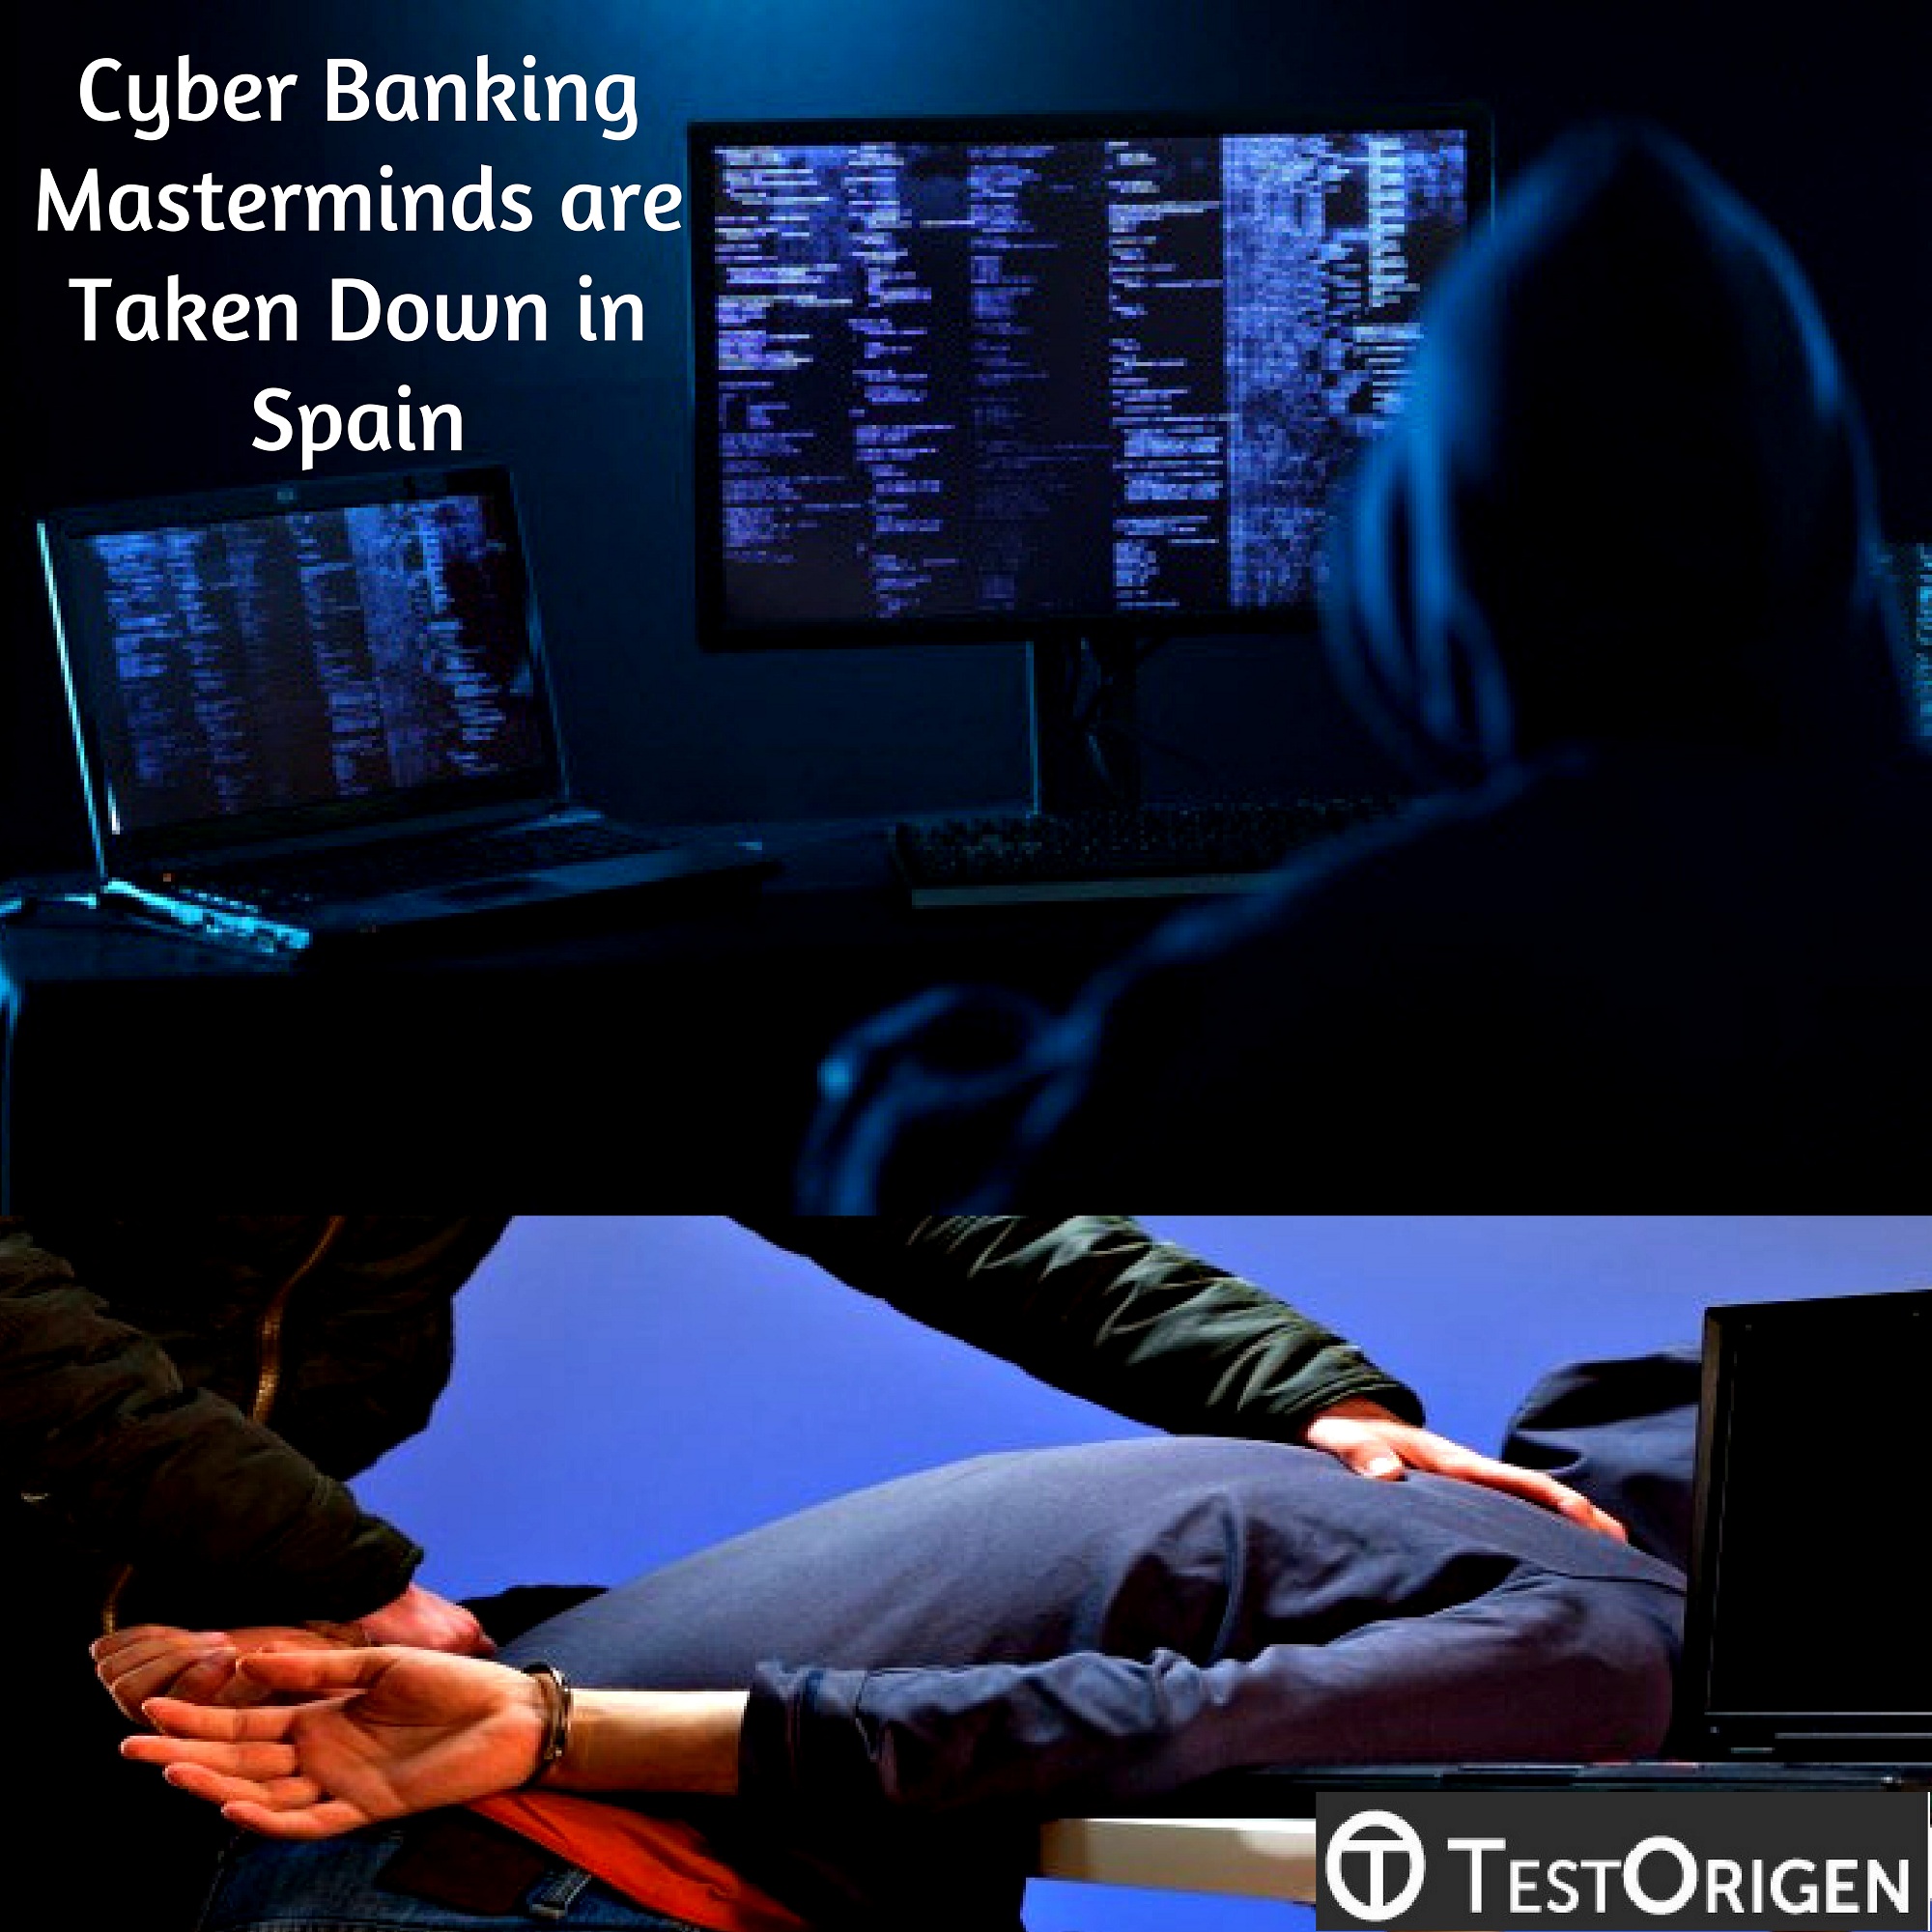 Cyber Banking Masterminds are Taken Down in Spain